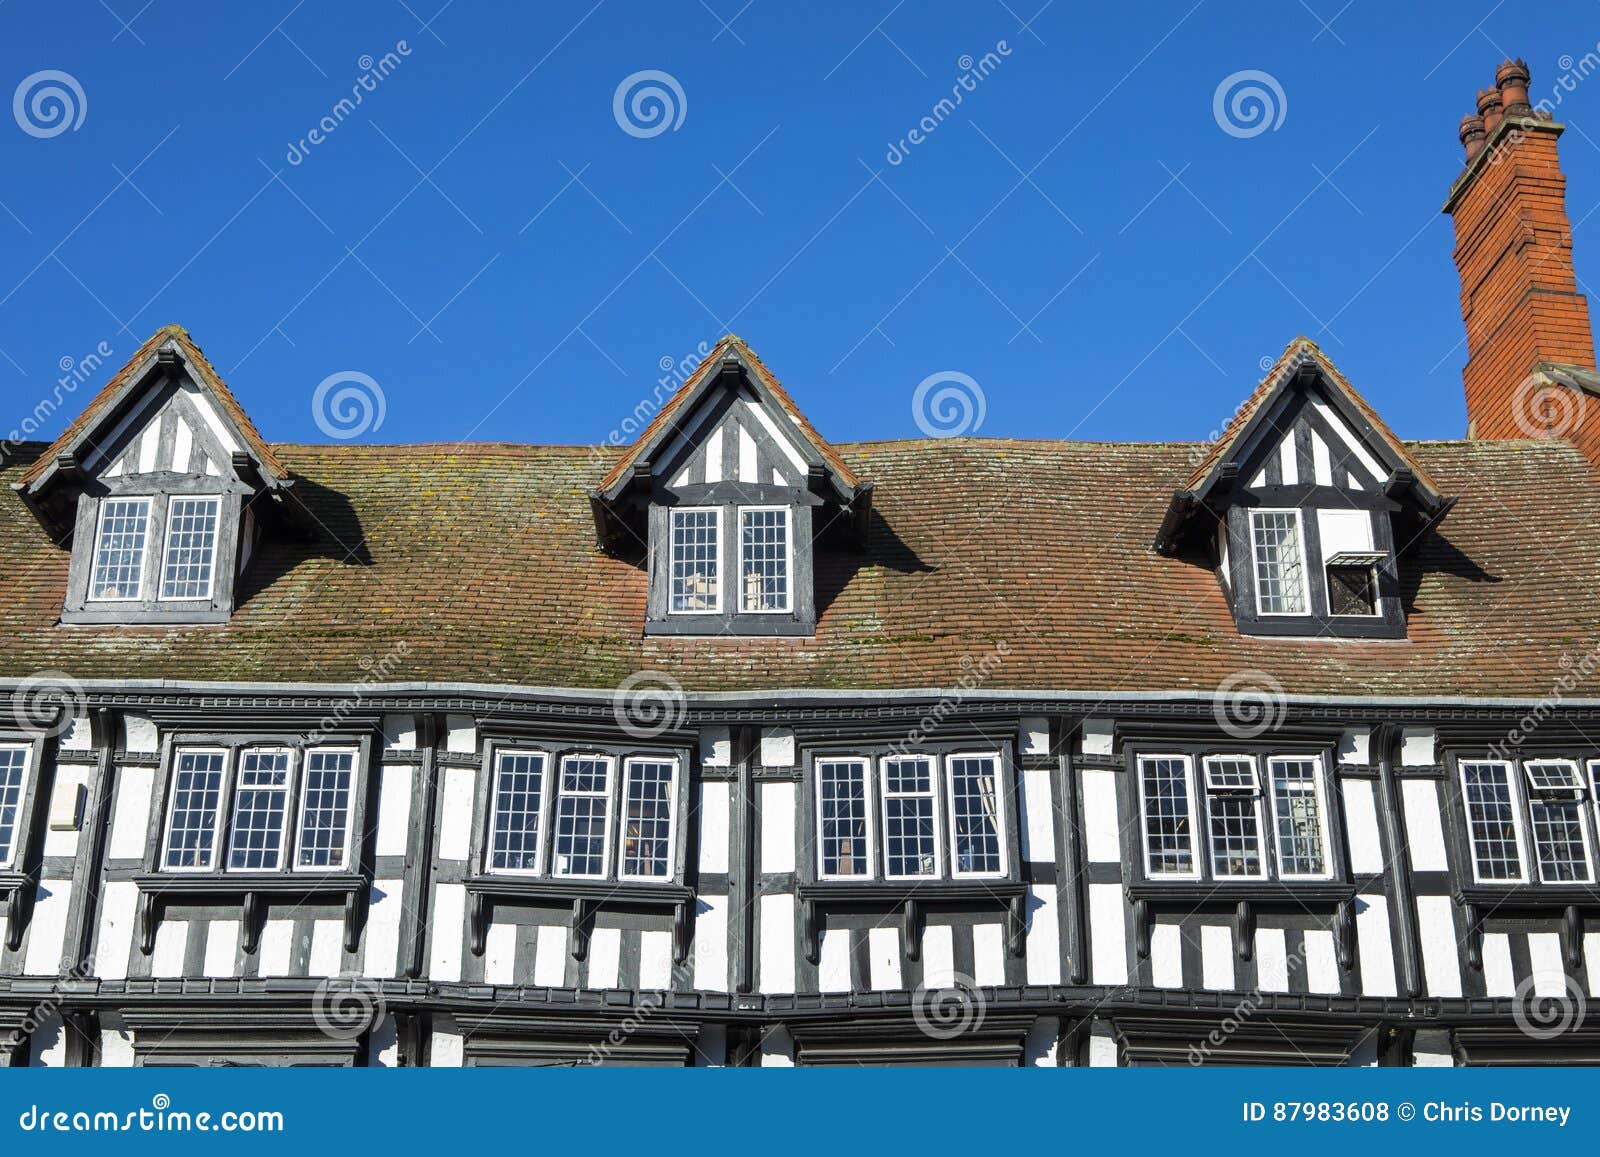 Lincoln Architecture stock photo. Image of frame, facade - 87983608